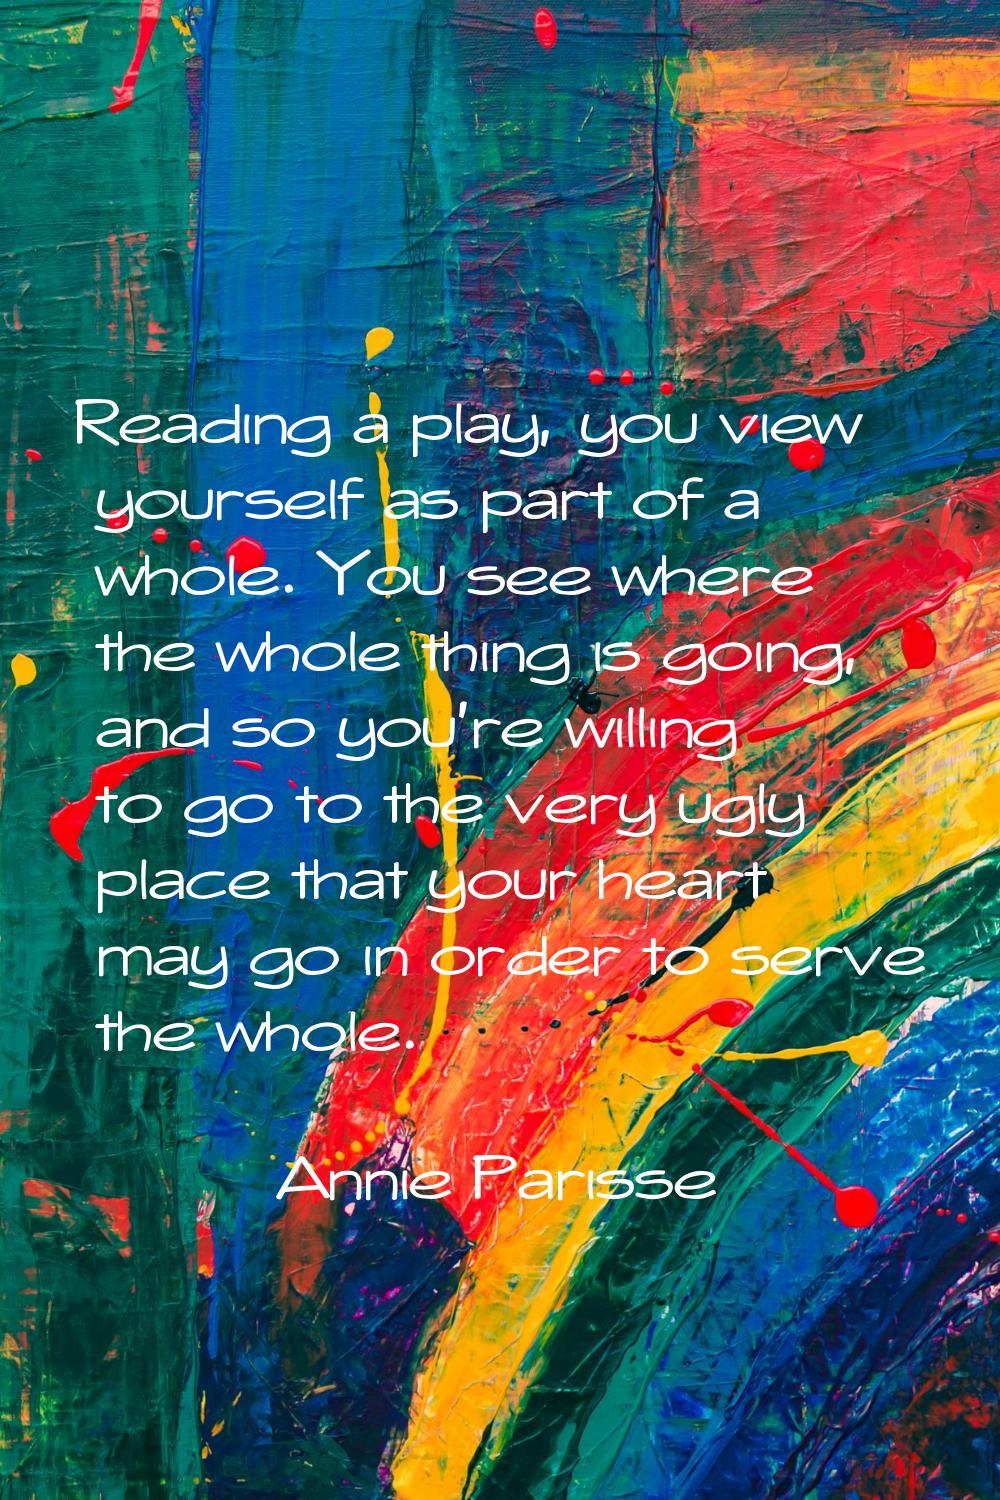 Reading a play, you view yourself as part of a whole. You see where the whole thing is going, and s